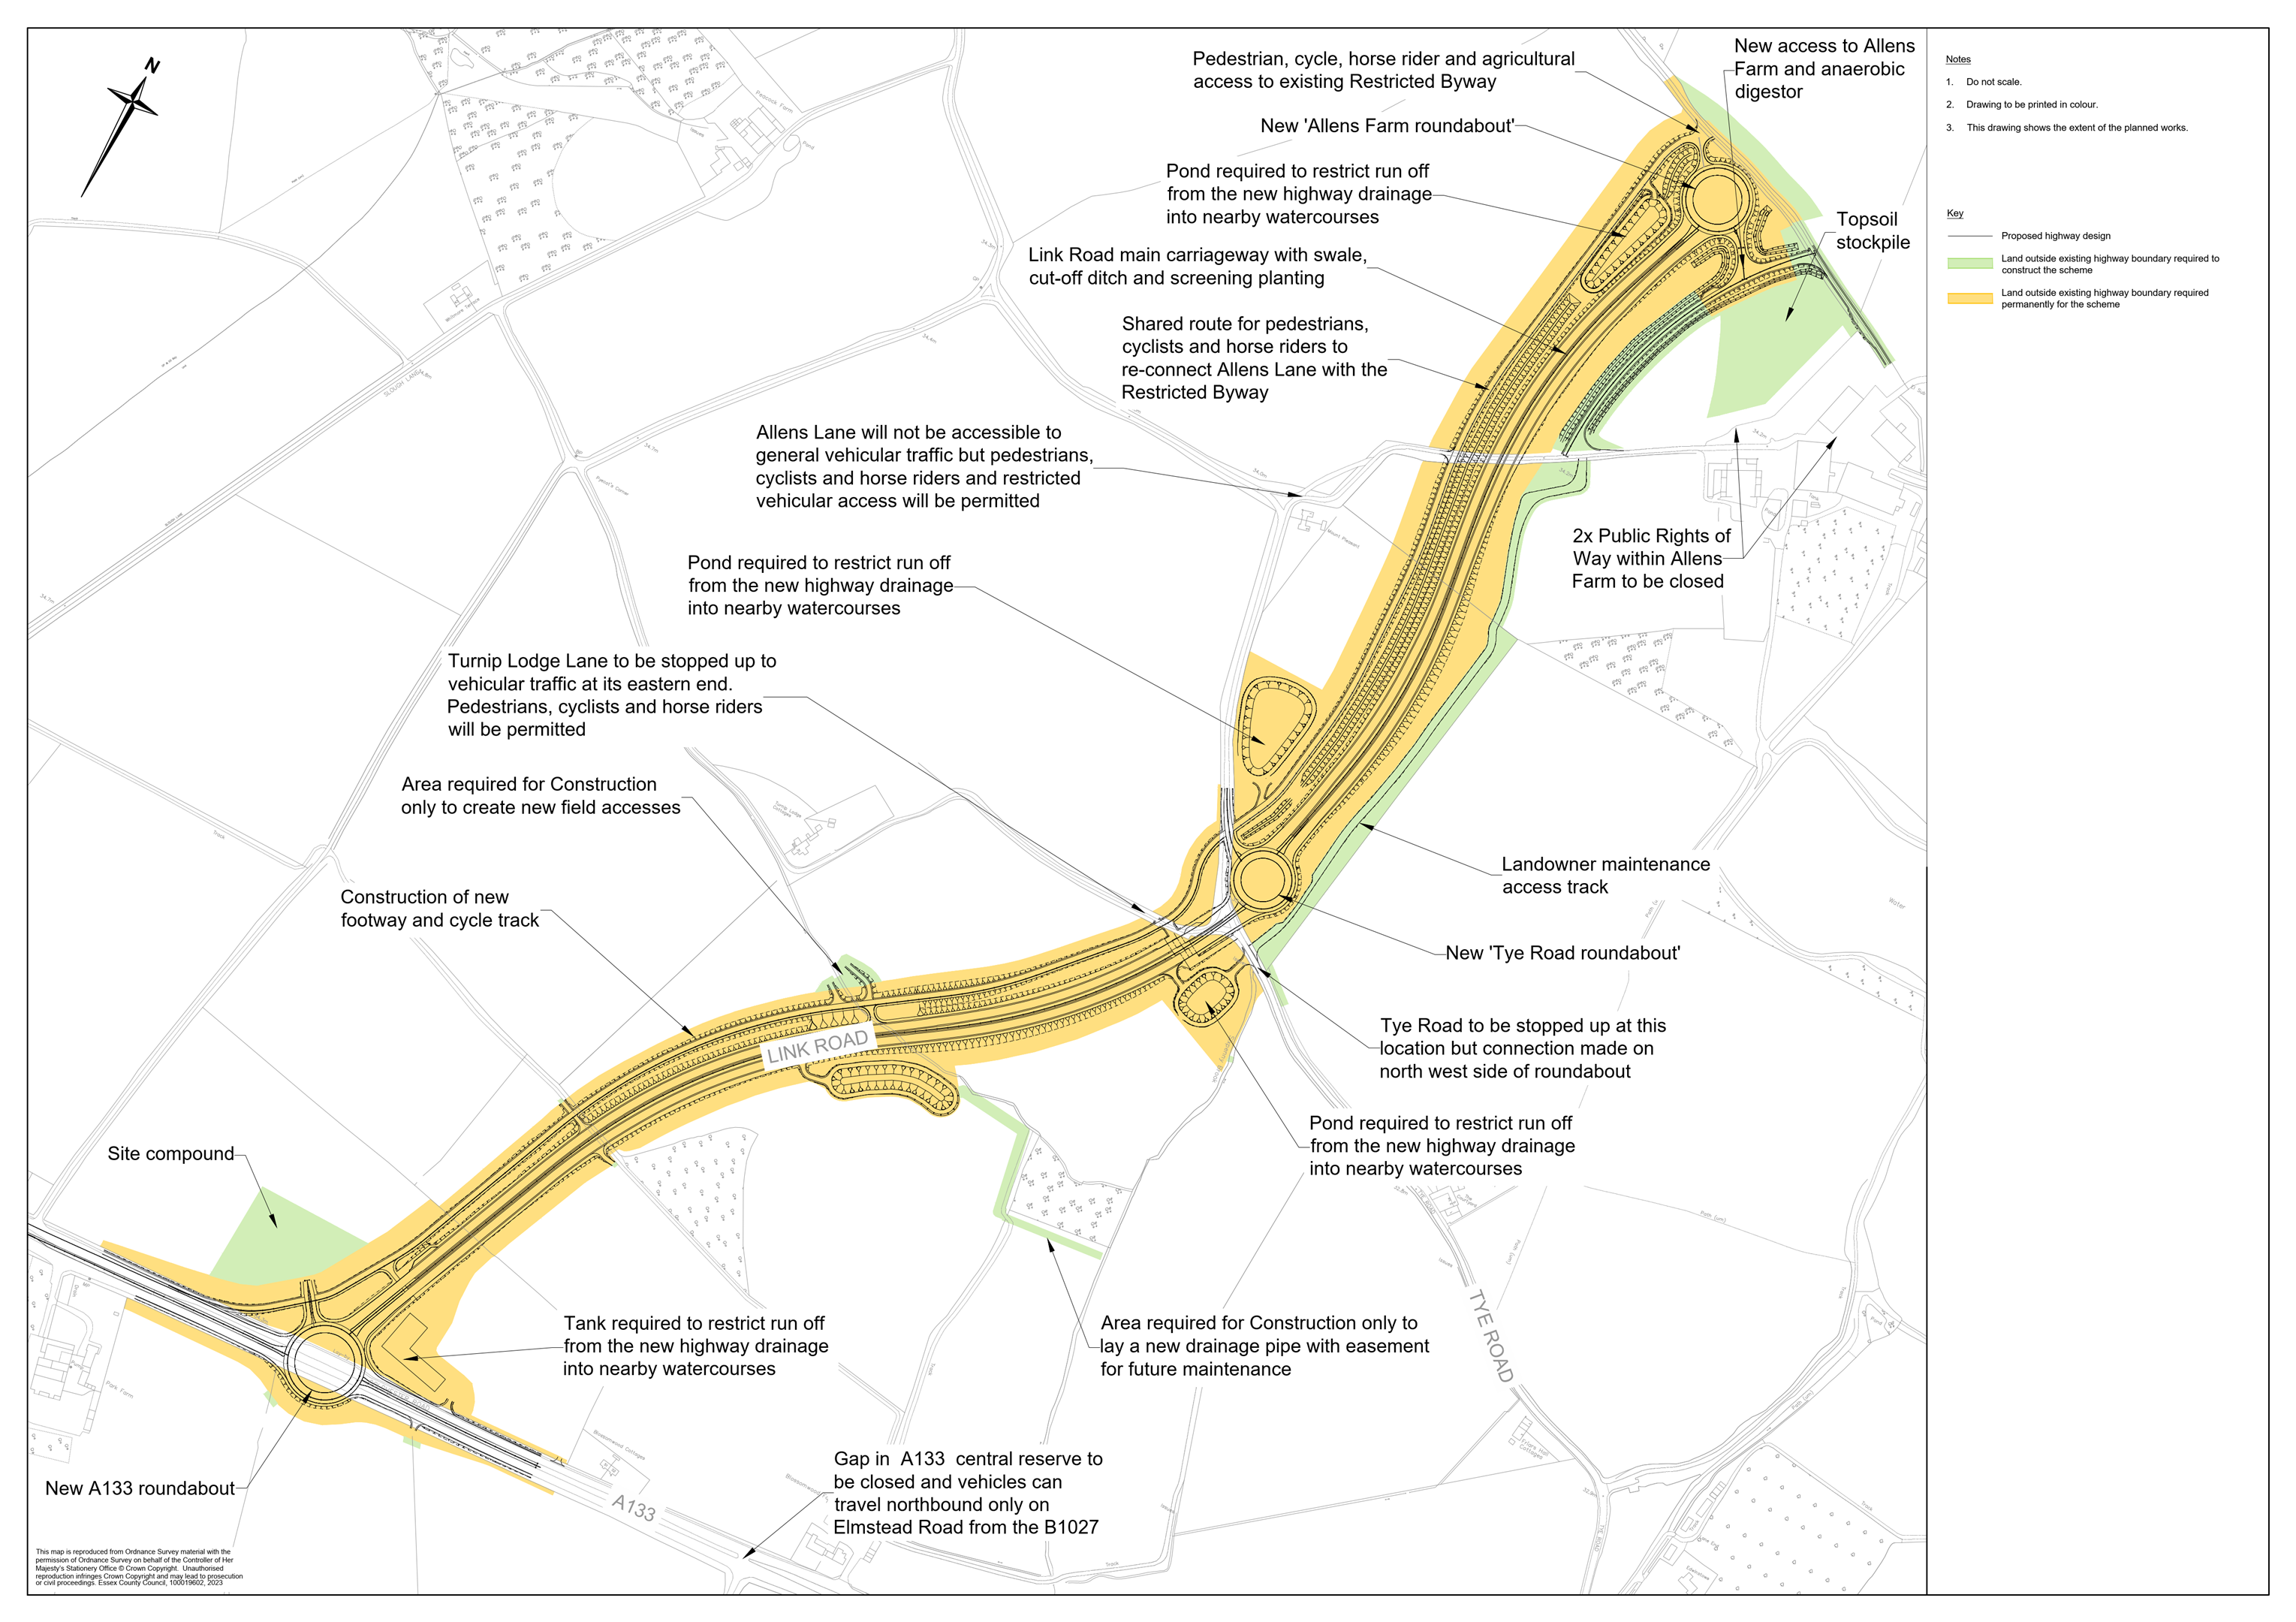 Phase 1 of the planned A120-A133 Link Road